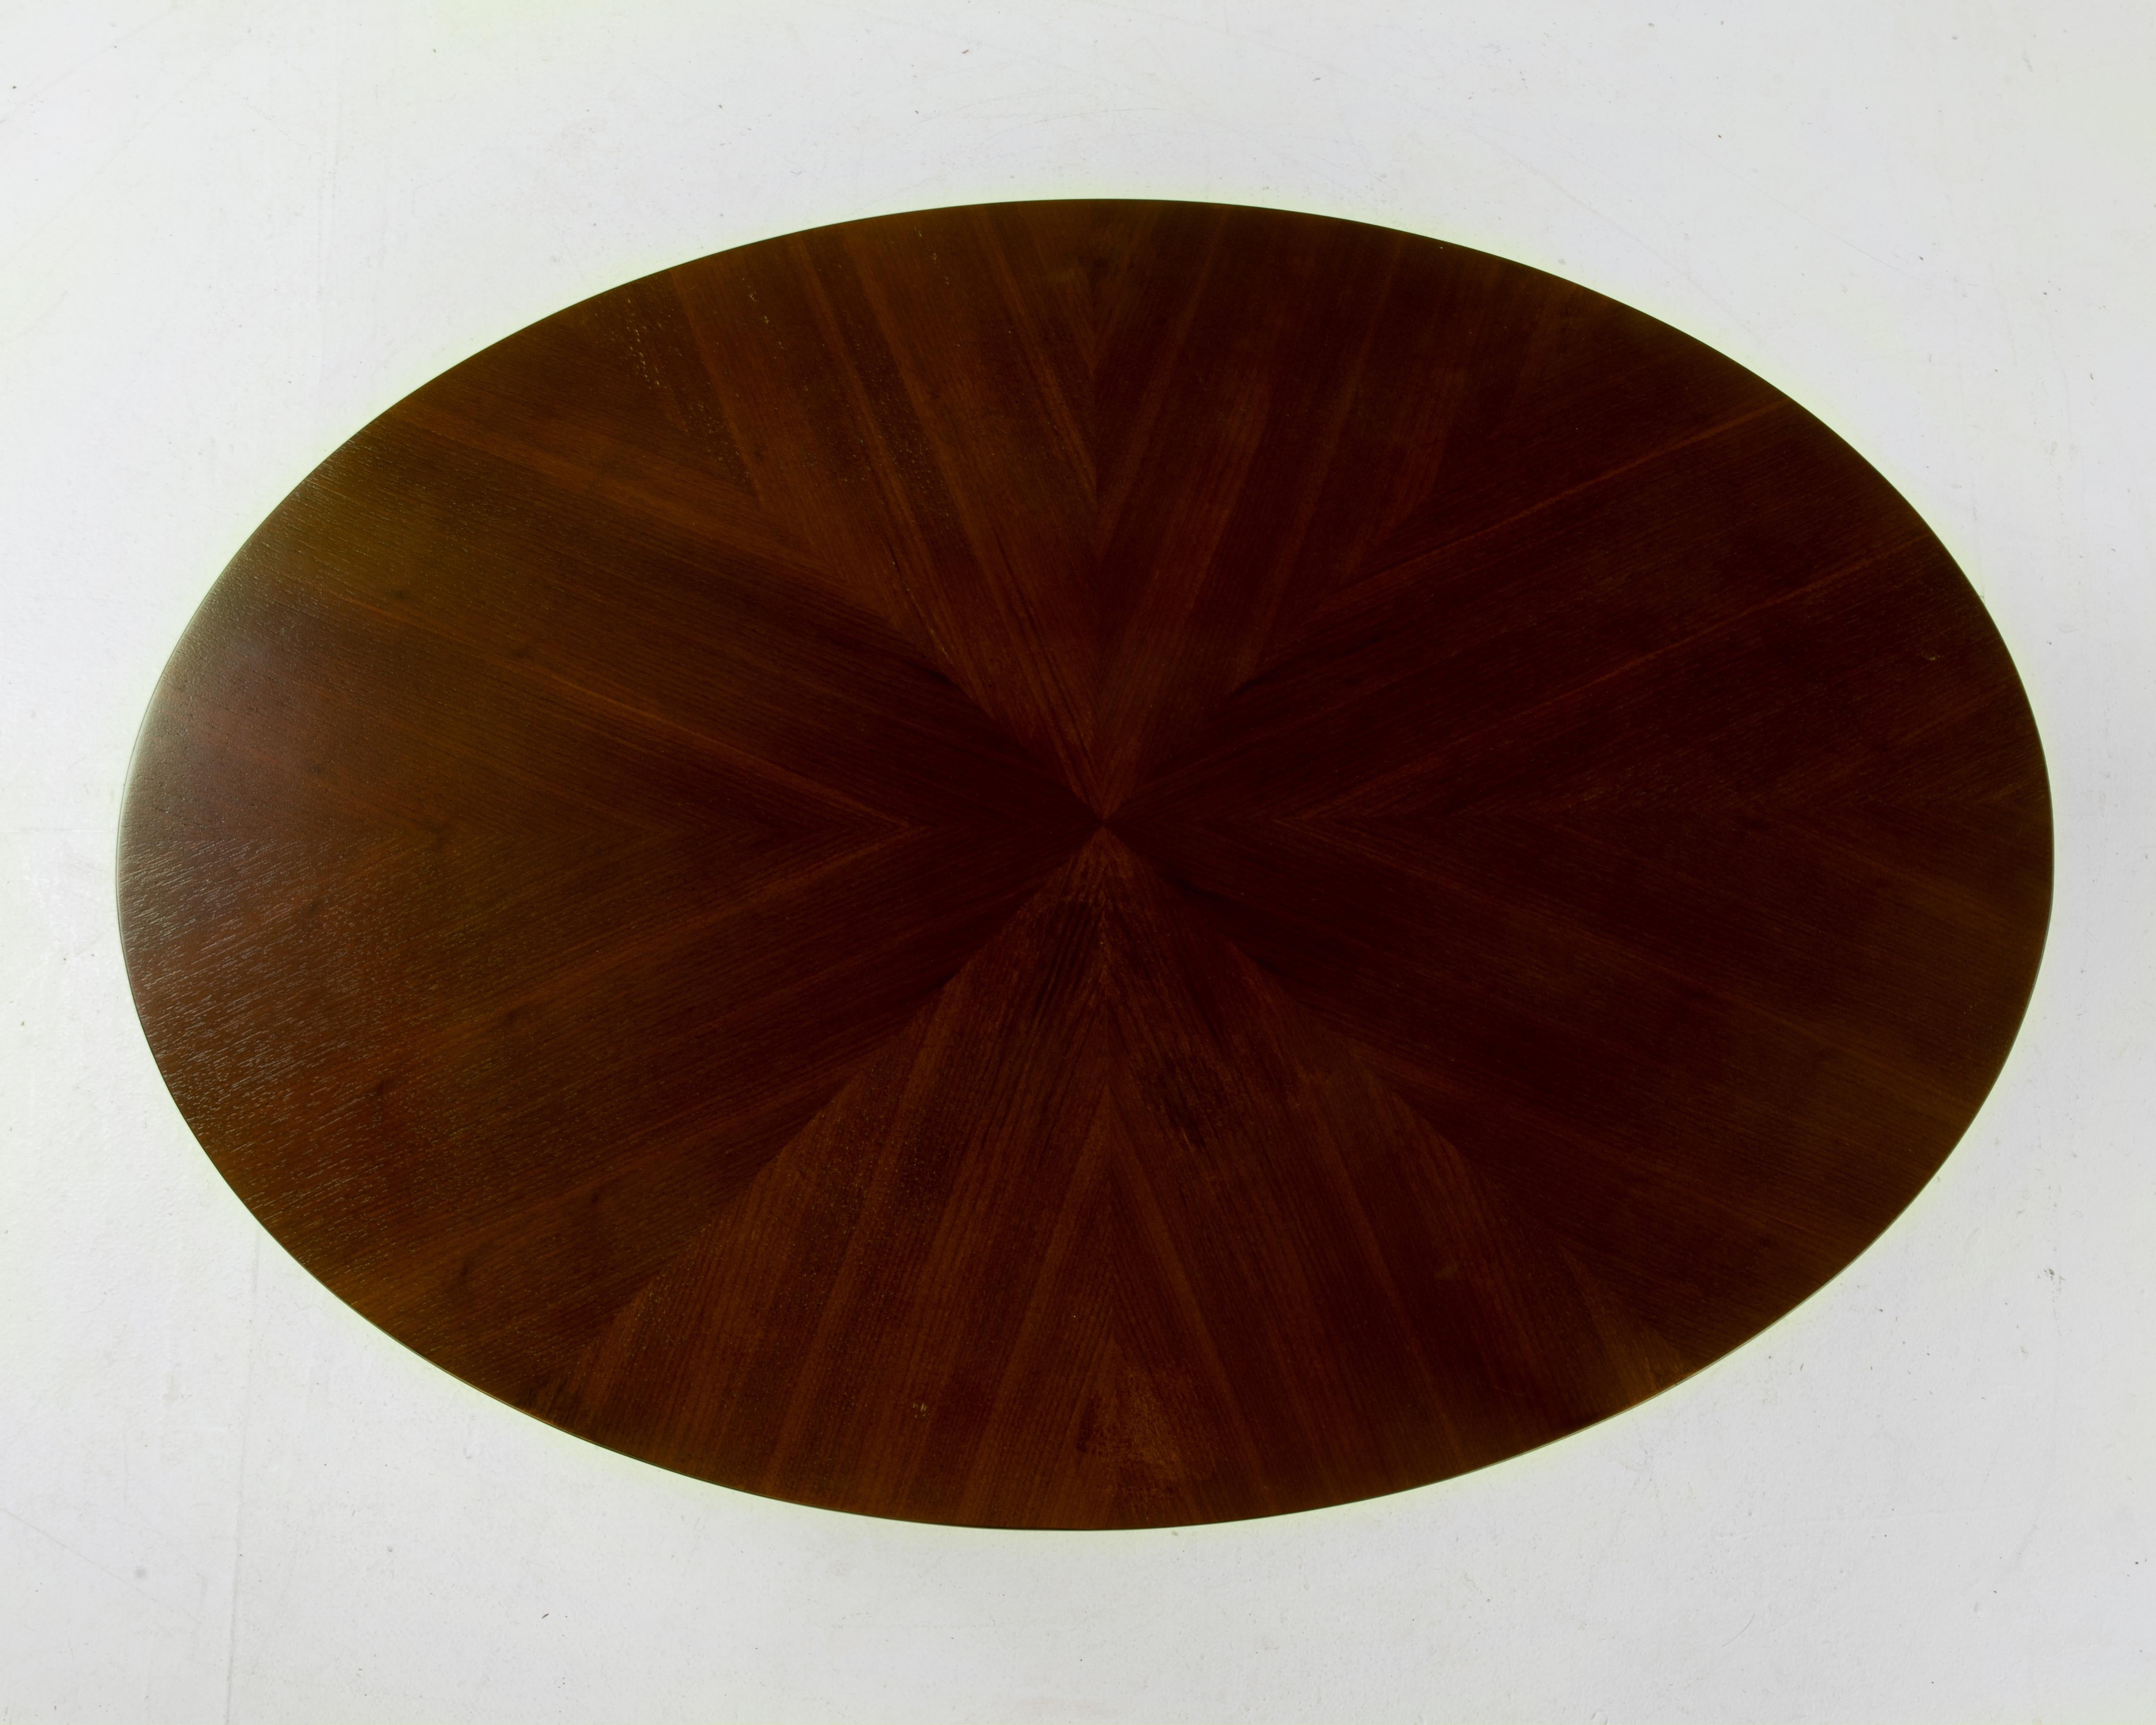 An oval drum or barrel coffee table with wonderful wood grain. Floating on a recessed black base with tapered sides, a very well executed piece.